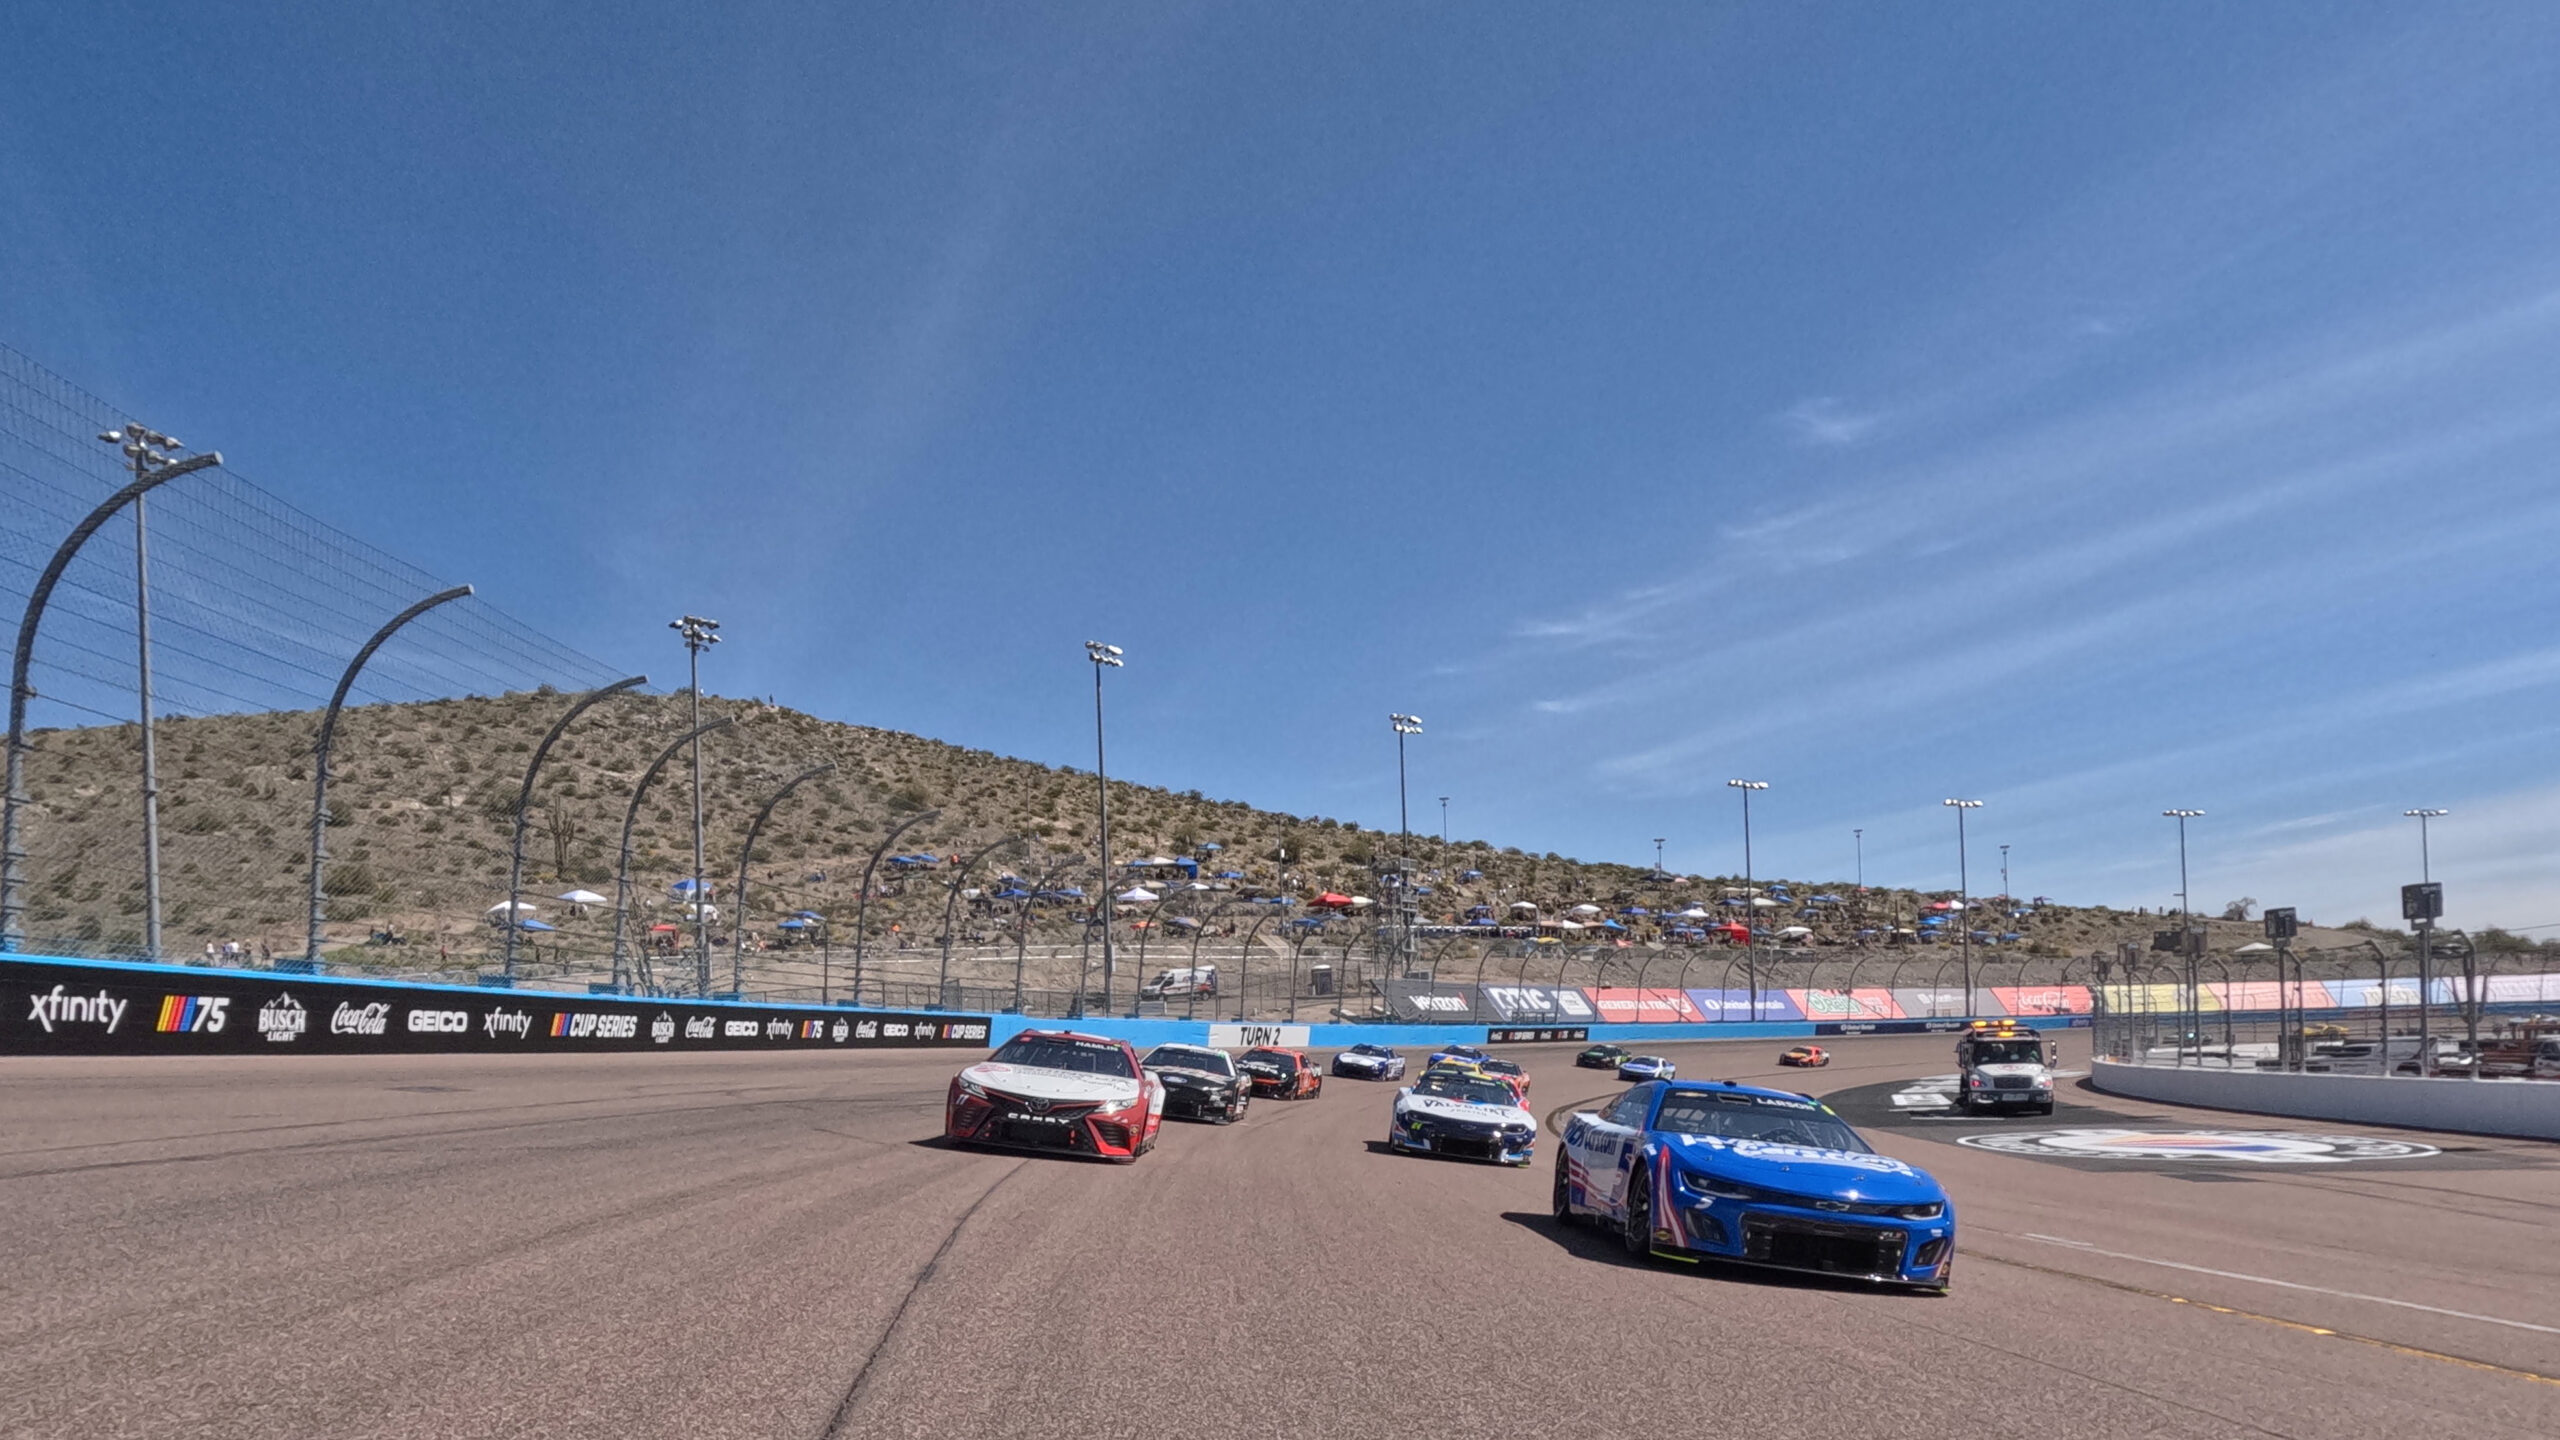 Who Will Find a Desert Oasis at Phoenix Raceway?